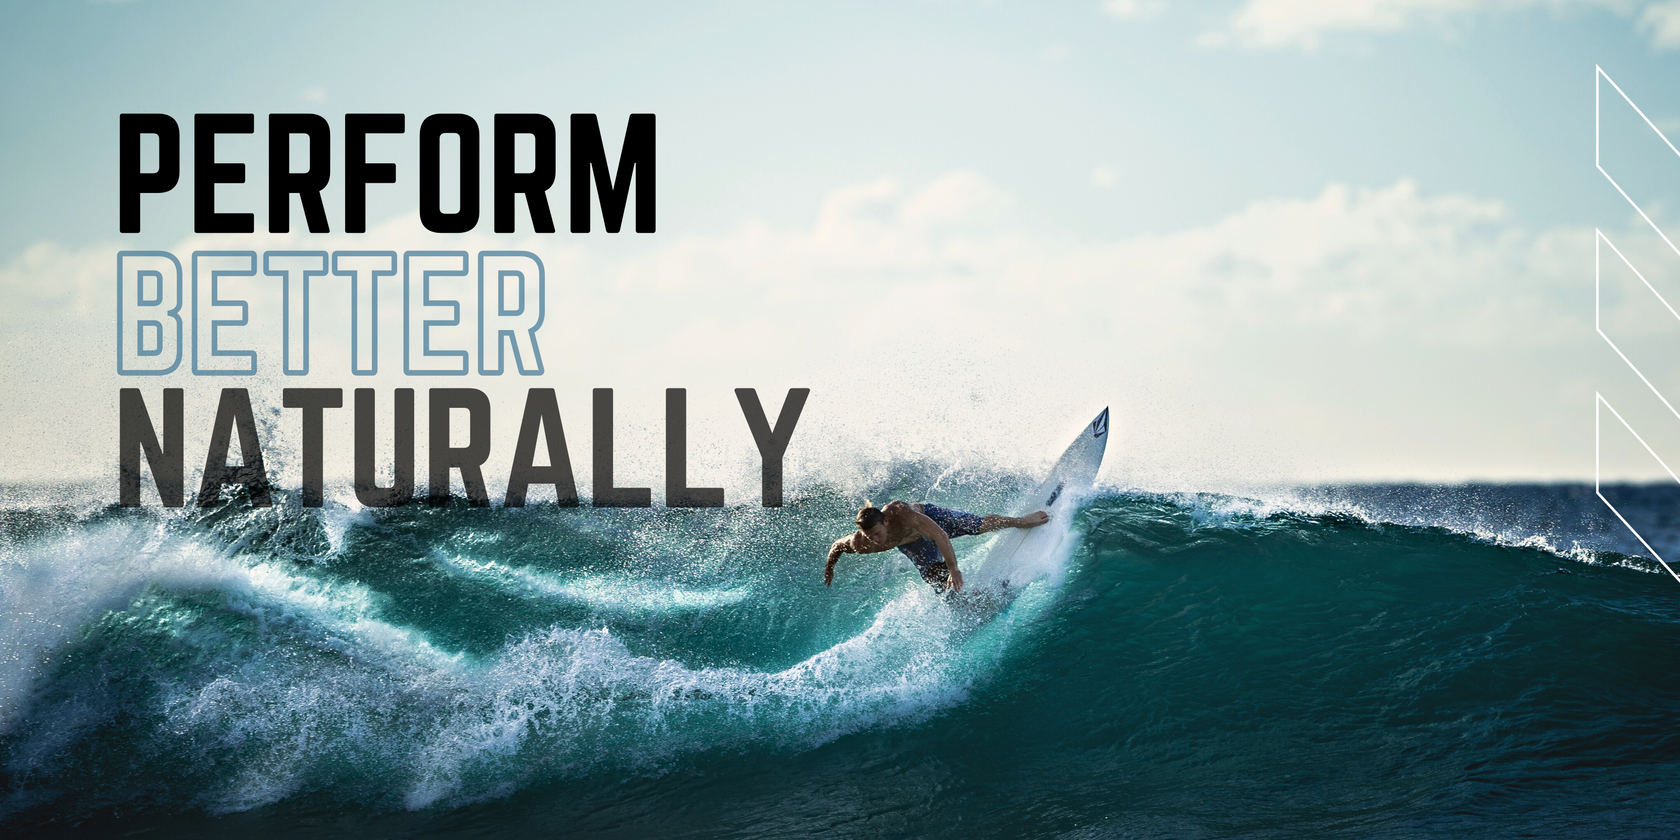 Perform better naturally text overlayed on an image of a surfer surfing a large wave.